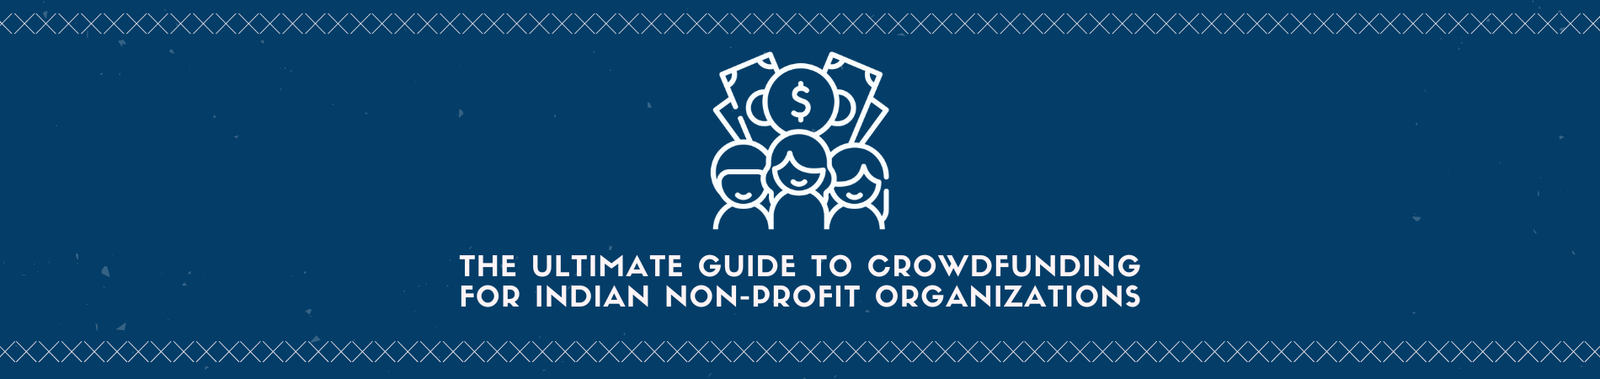 The Ultimate Guide to Crowdfunding for Indian Non-Profit Organizations